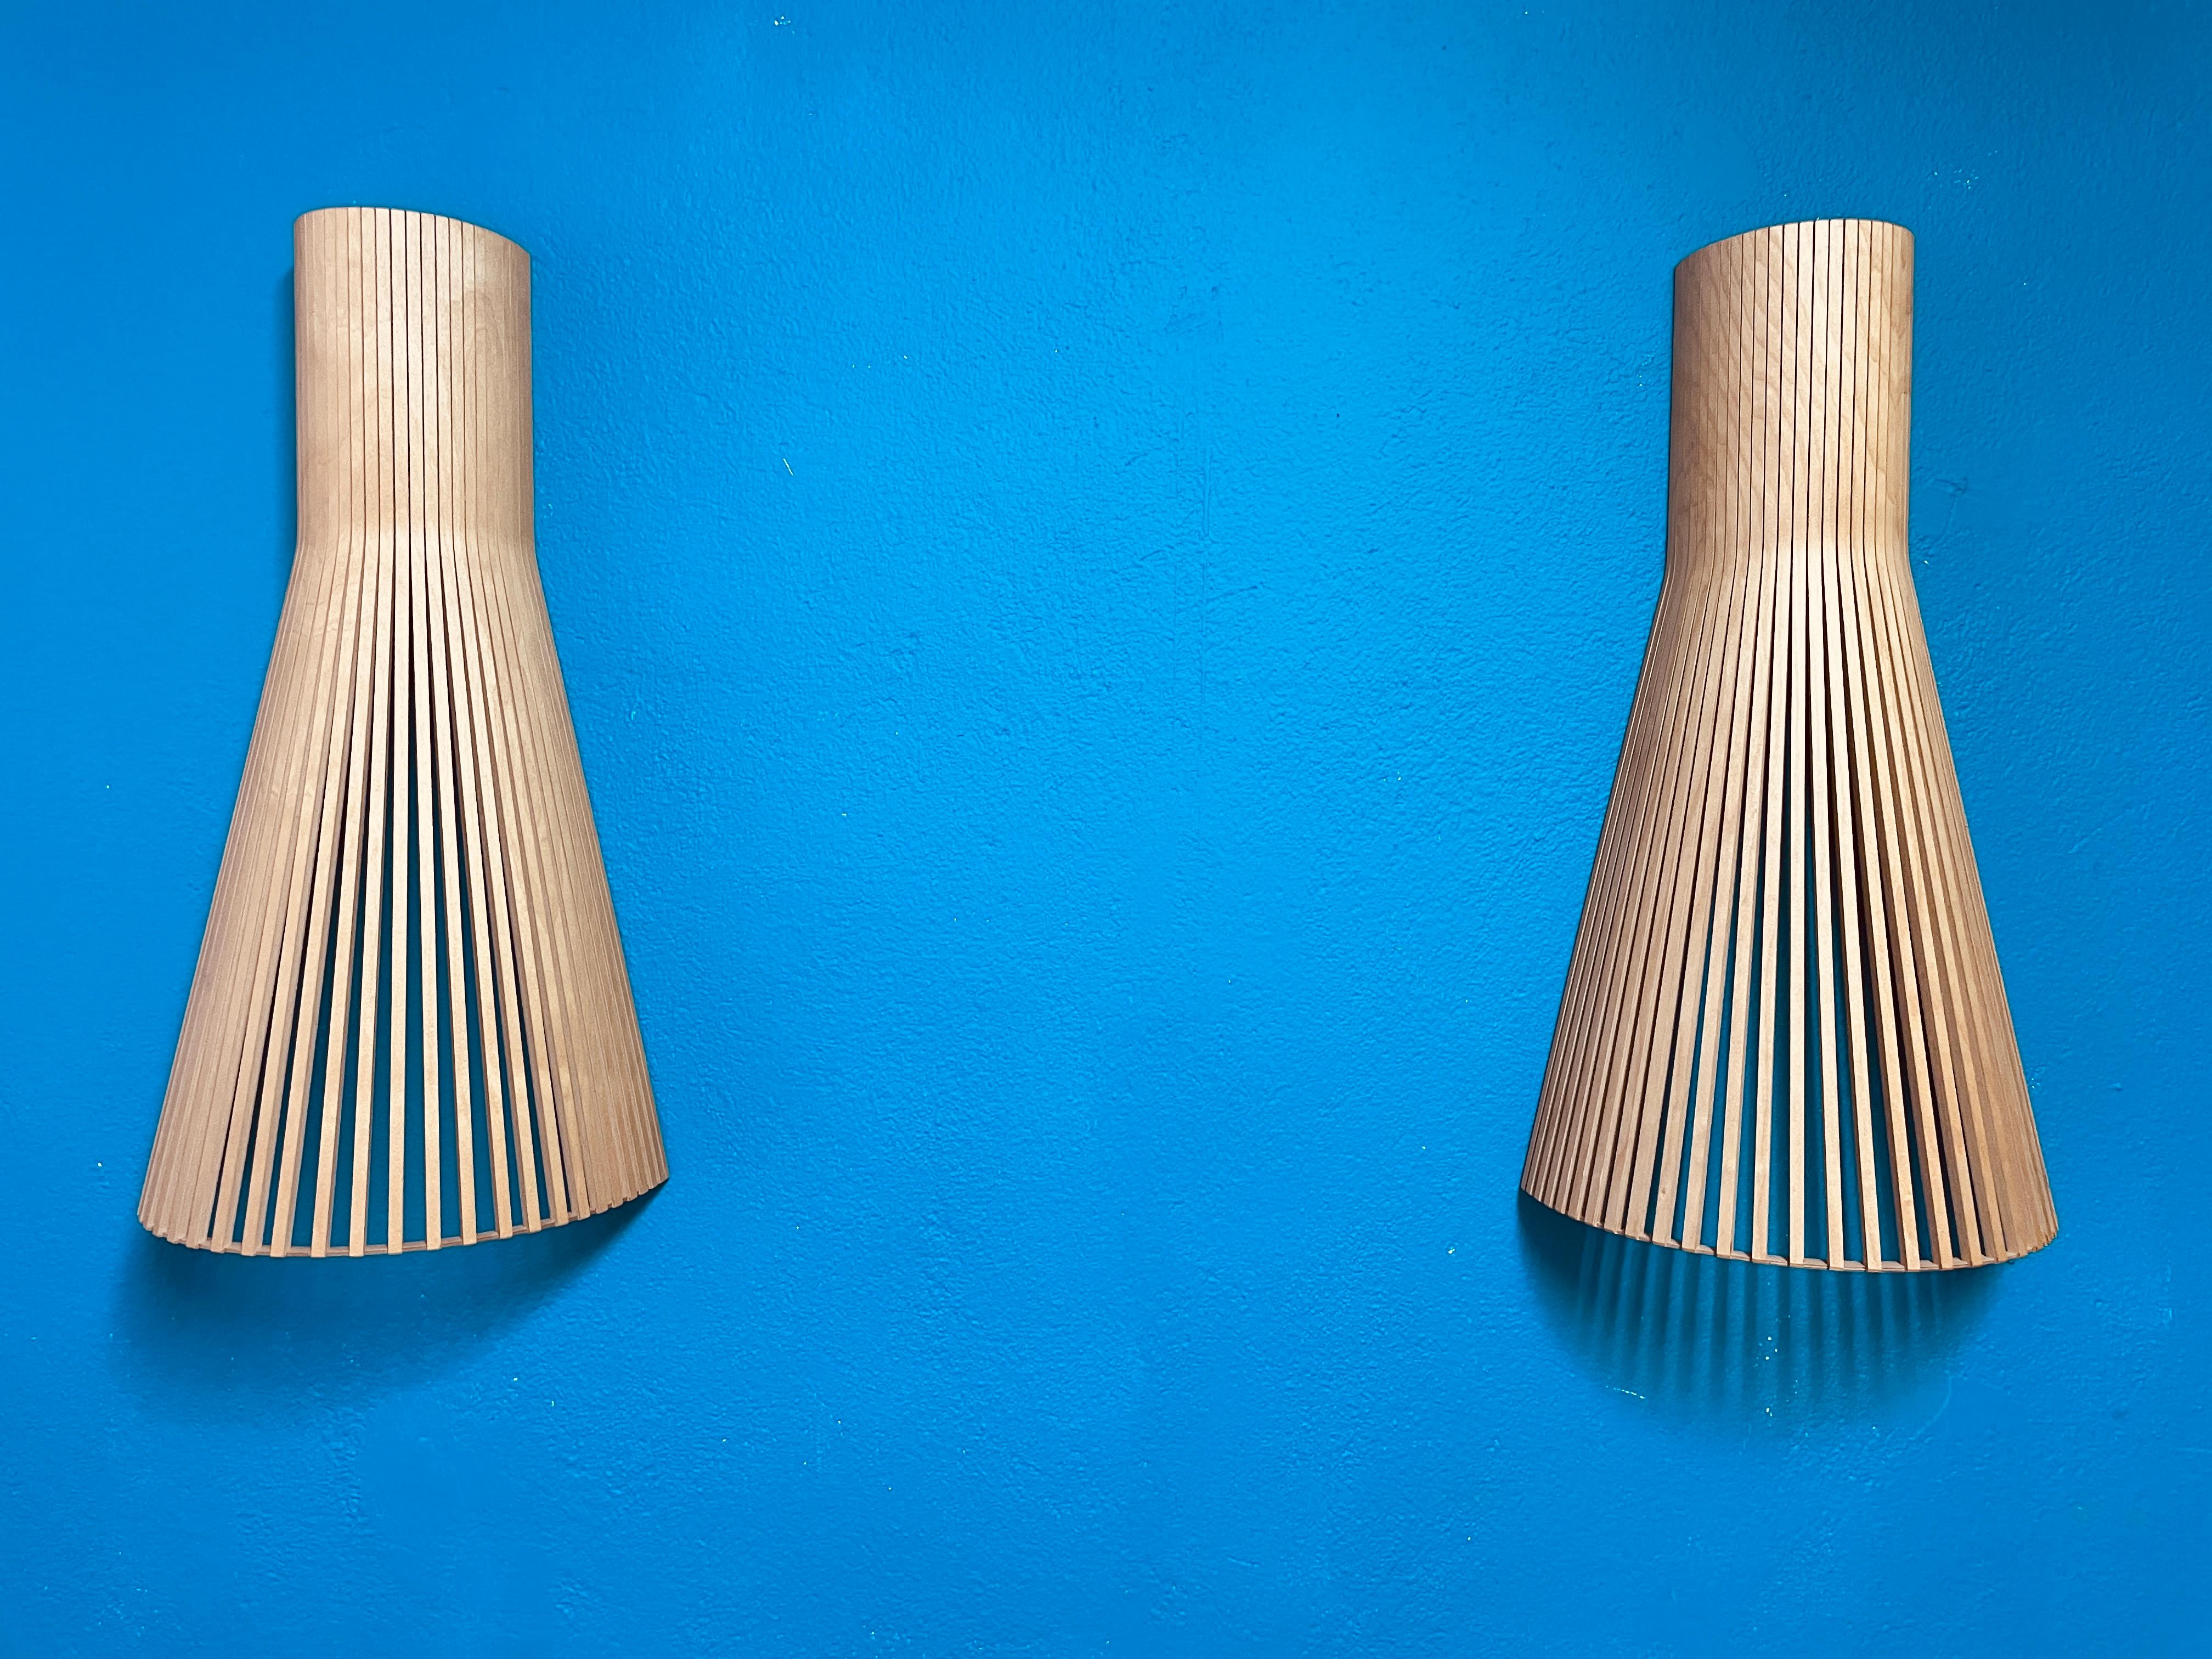 These natural birch colored wall lights can be placed facing either upwards or downwards. Enlivens plain hallways and creates an inspiring mood.

Handmade of PEFC-certified form pressed birch in Finland by highly skilled craftsmen. The wood